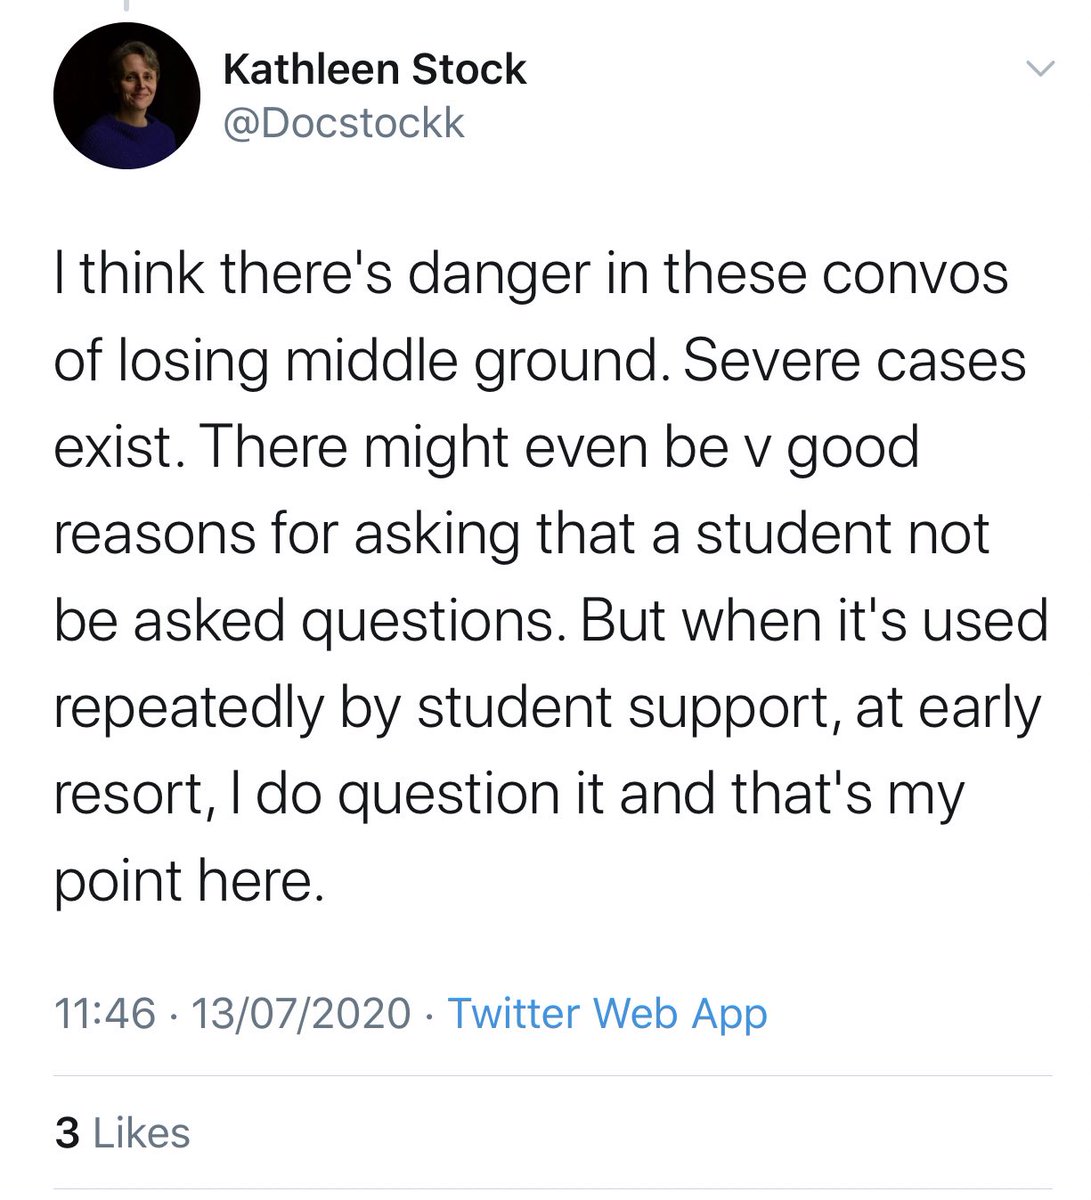 academics i promise it is not your job to decide whether students’ reasonable adjustments are warranted or not (or how “severe” their cases are) and you’re probably not in a good position to do so anyway